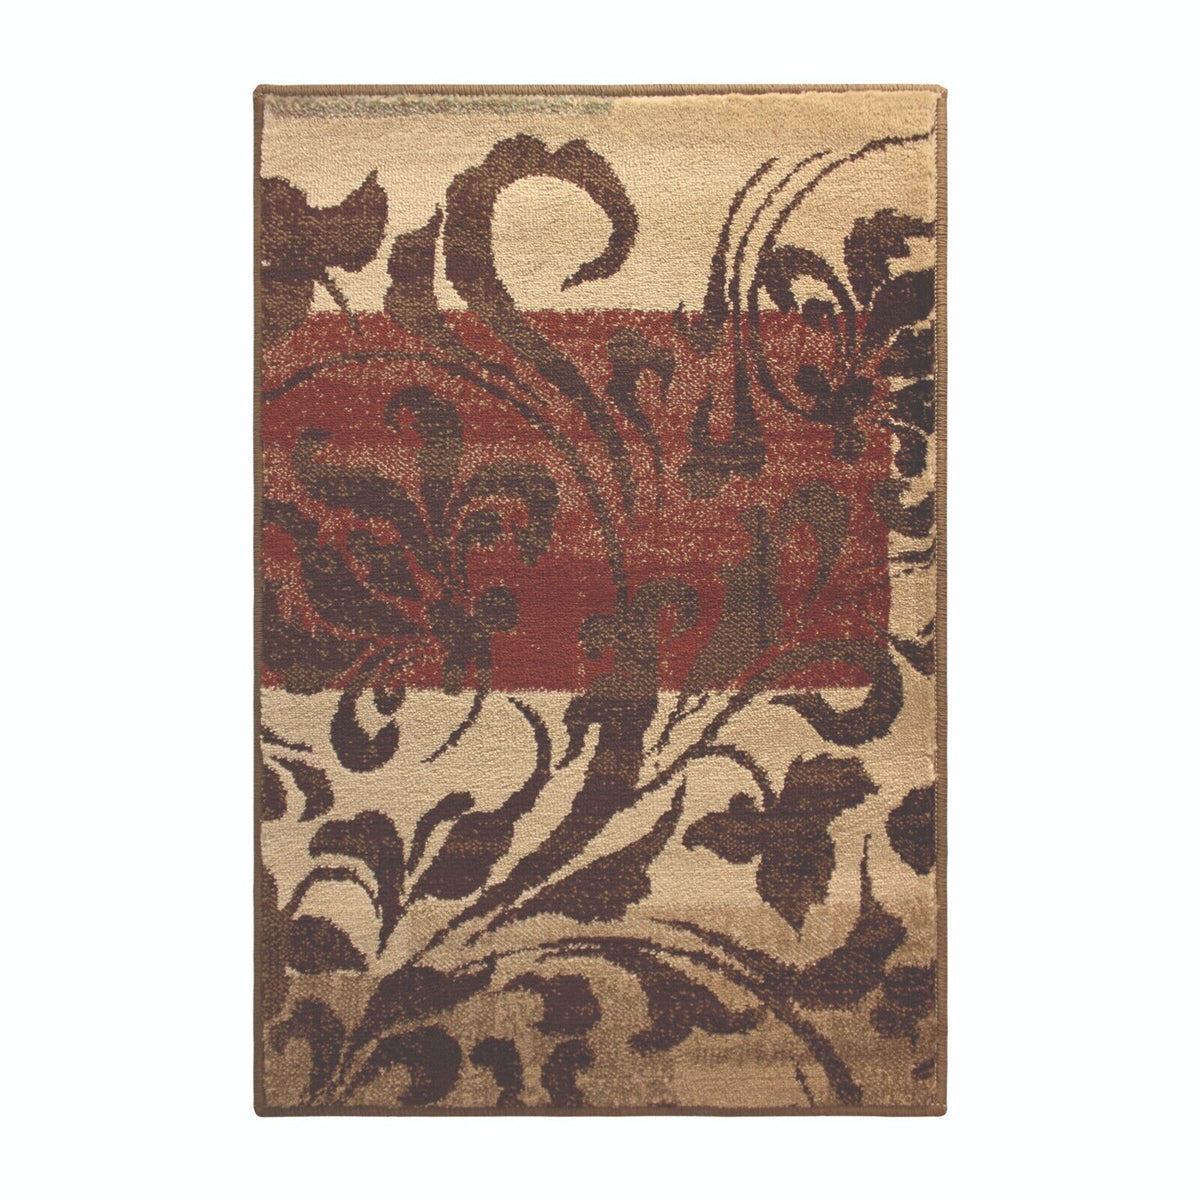 Storyville Modern Geometric Abstract Floral Scroll Area Rug or Runner - Chocolate